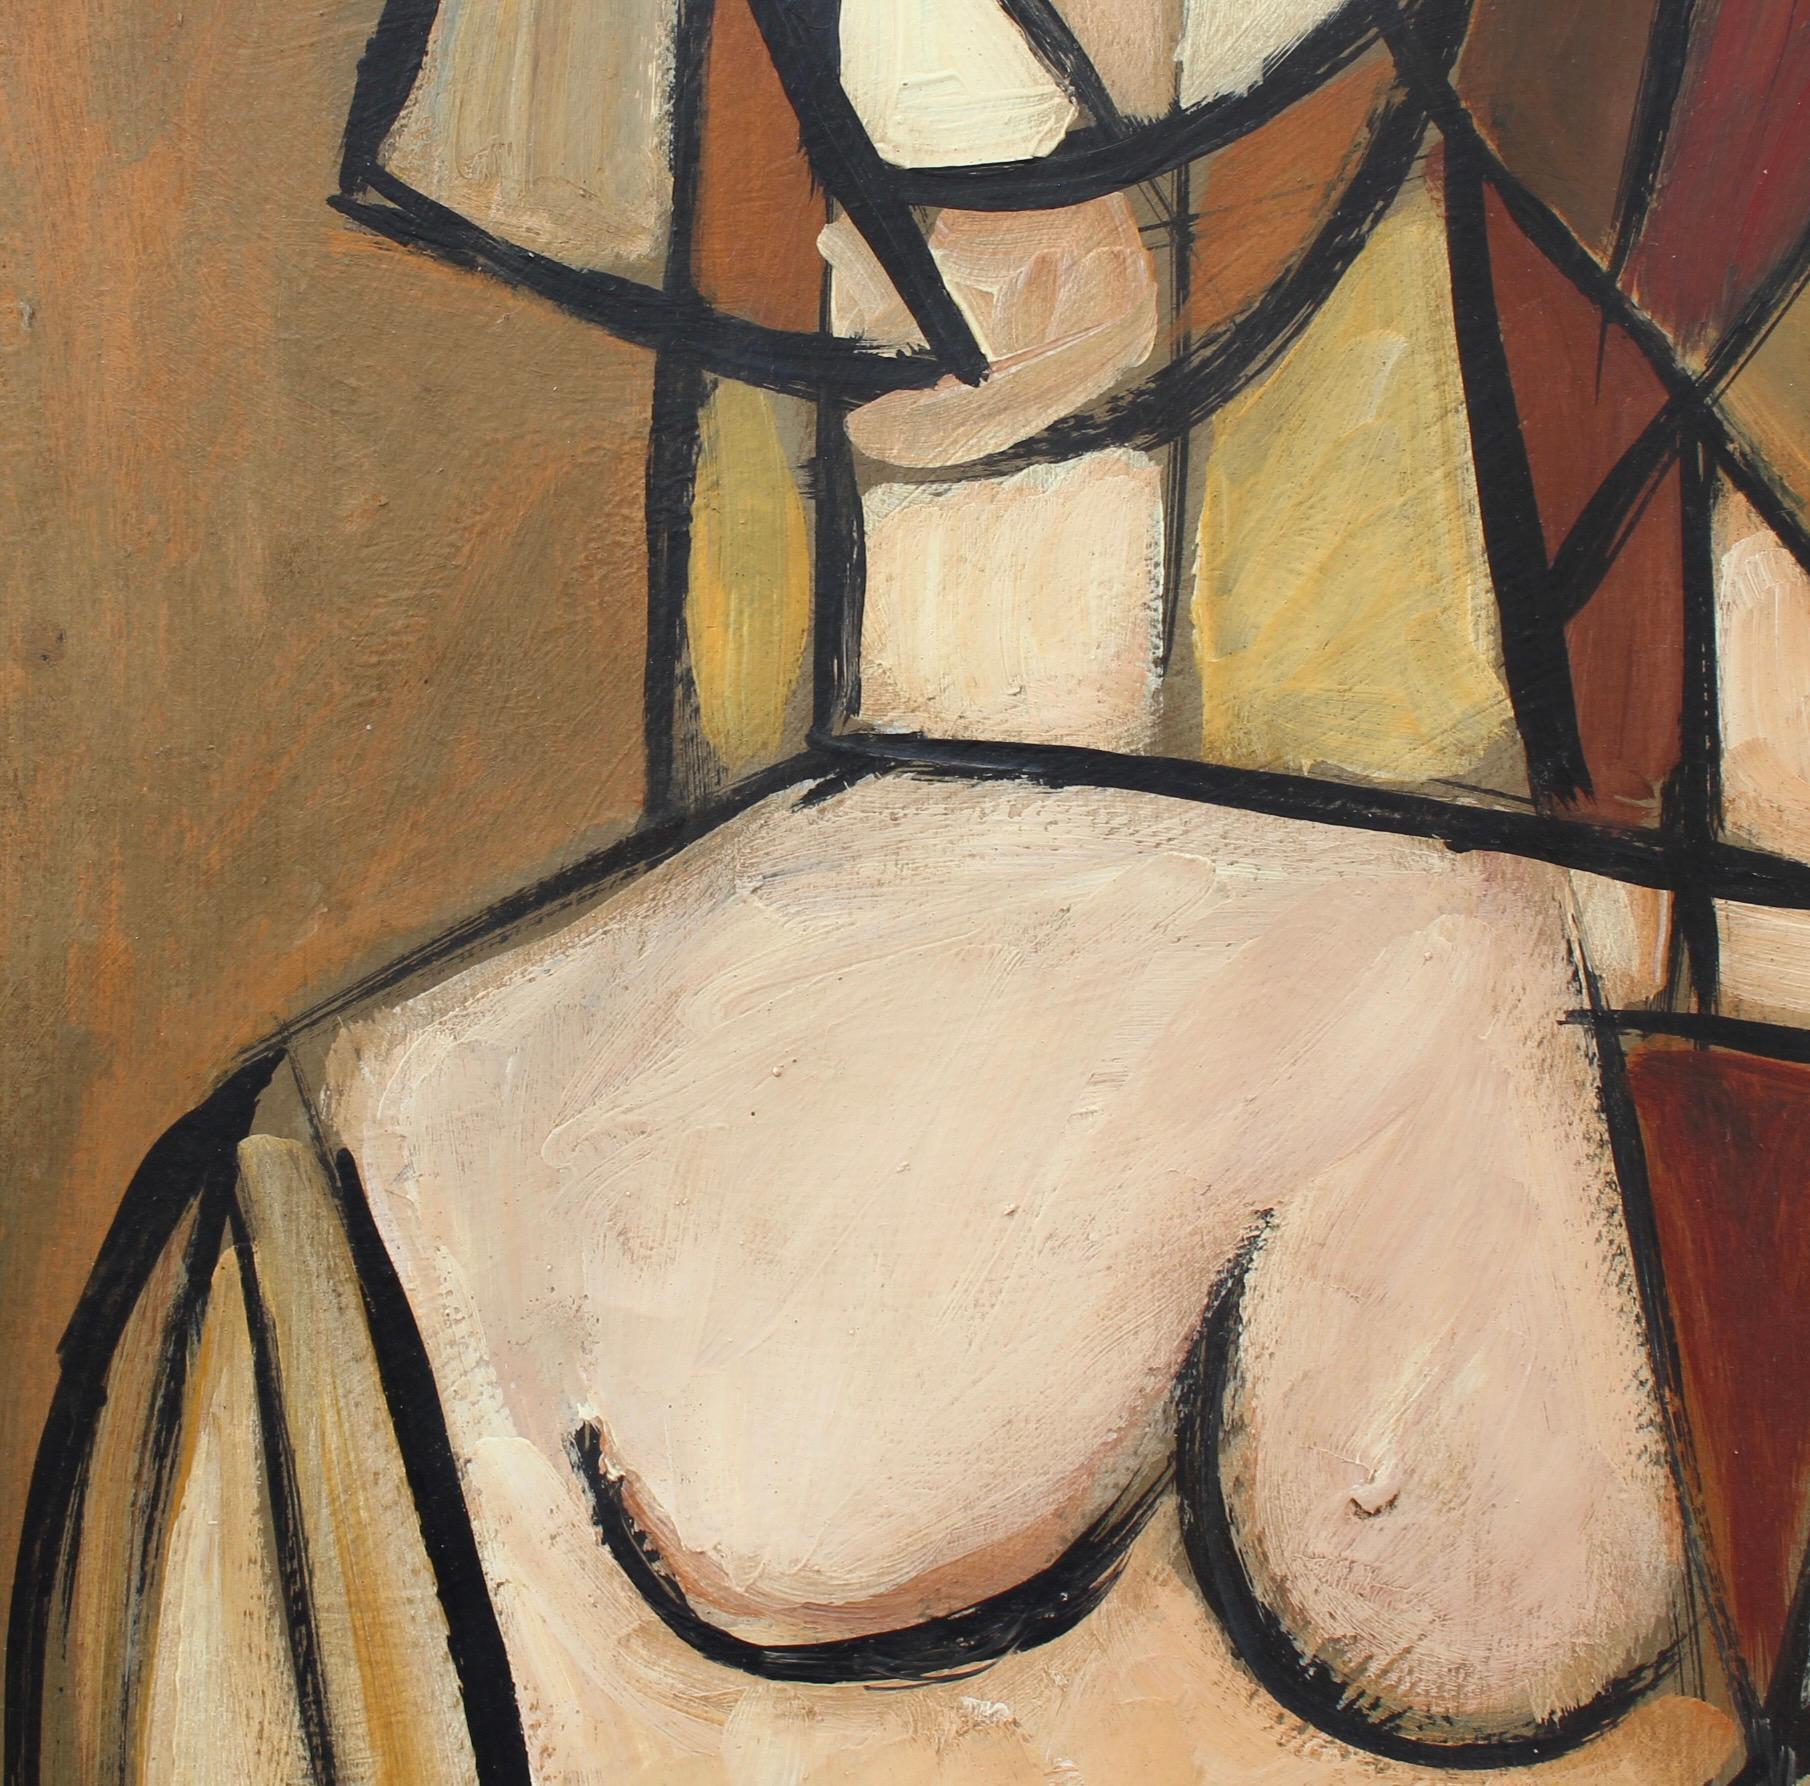 'Portrait of Smiling Woman', oil on board, by STM (circa 1970s). Is this a modern version of da Vinci's Mona Lisa? The similarities are apparent - a cubist version of wavy hair, the high brow, the is-she-or-isn't-she-looking-at-me-gaze, the crossed